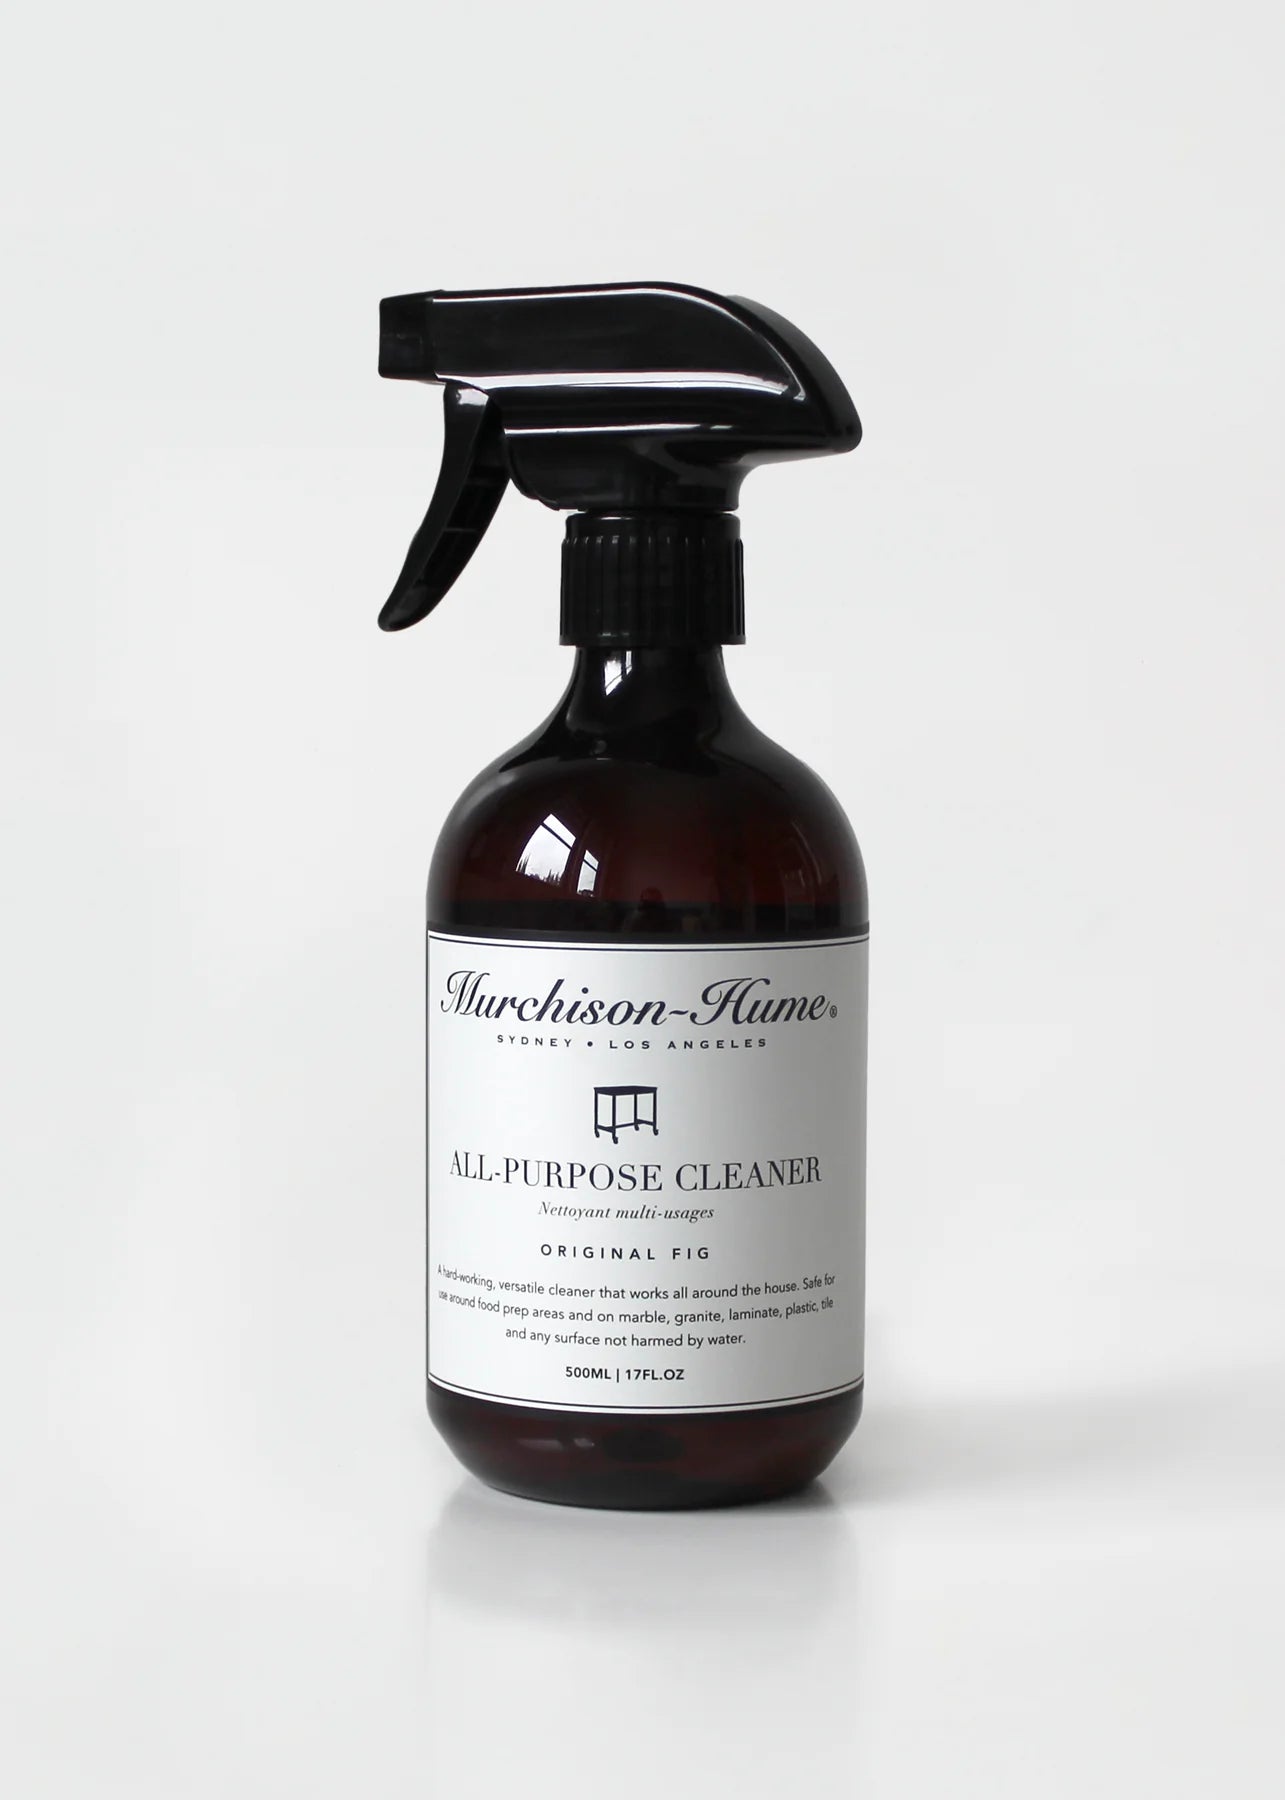 Murchison Hume All Purpose Cleaner Original Fig 500ml